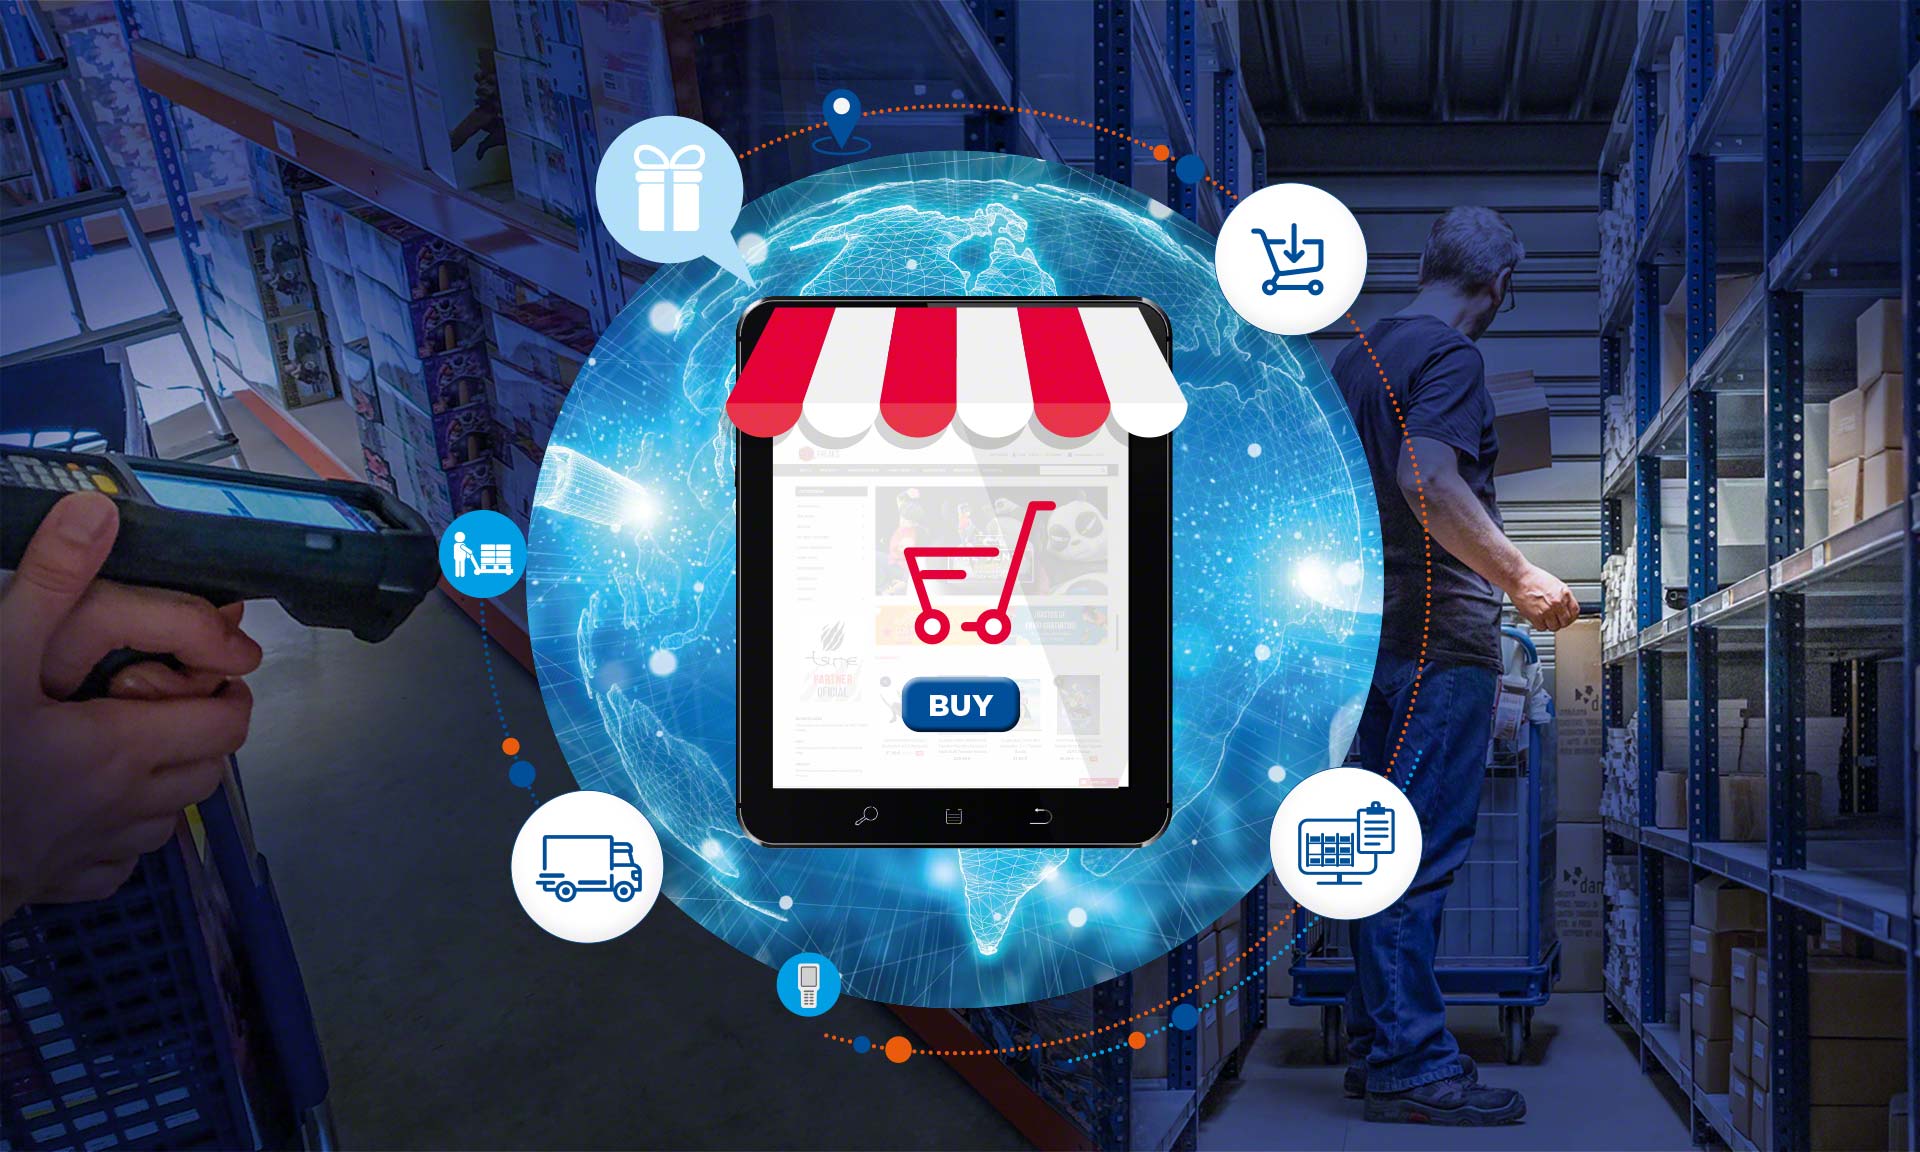 Omnichannel refers to a new market trend whereby multiple communication channels ensure a unique shopping experience